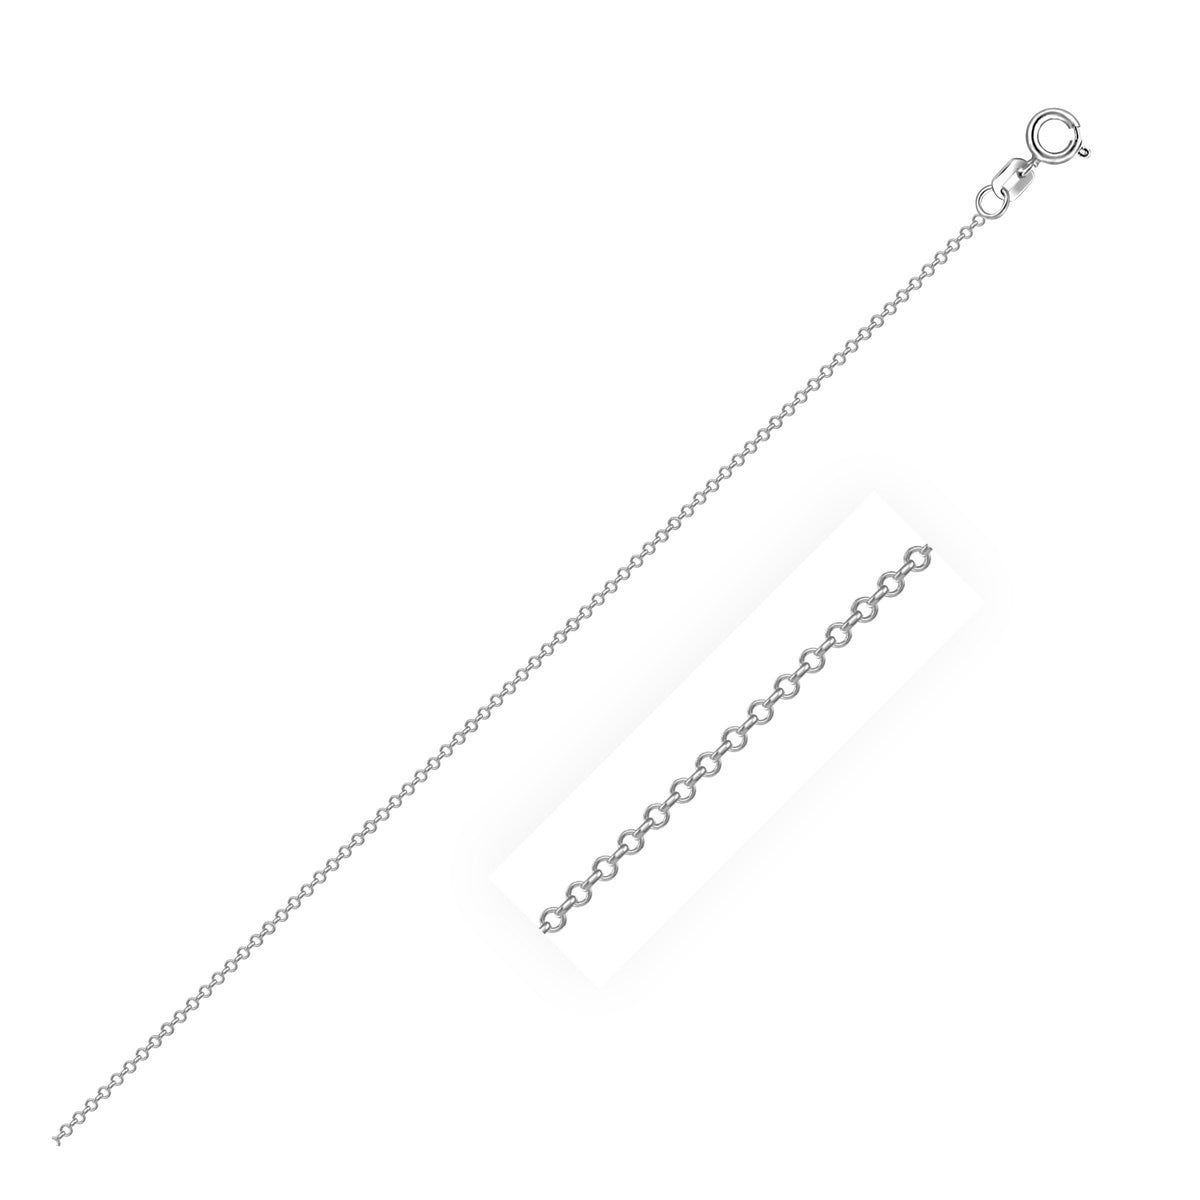 Cable Link Chain - 10k White Gold 0.50mm